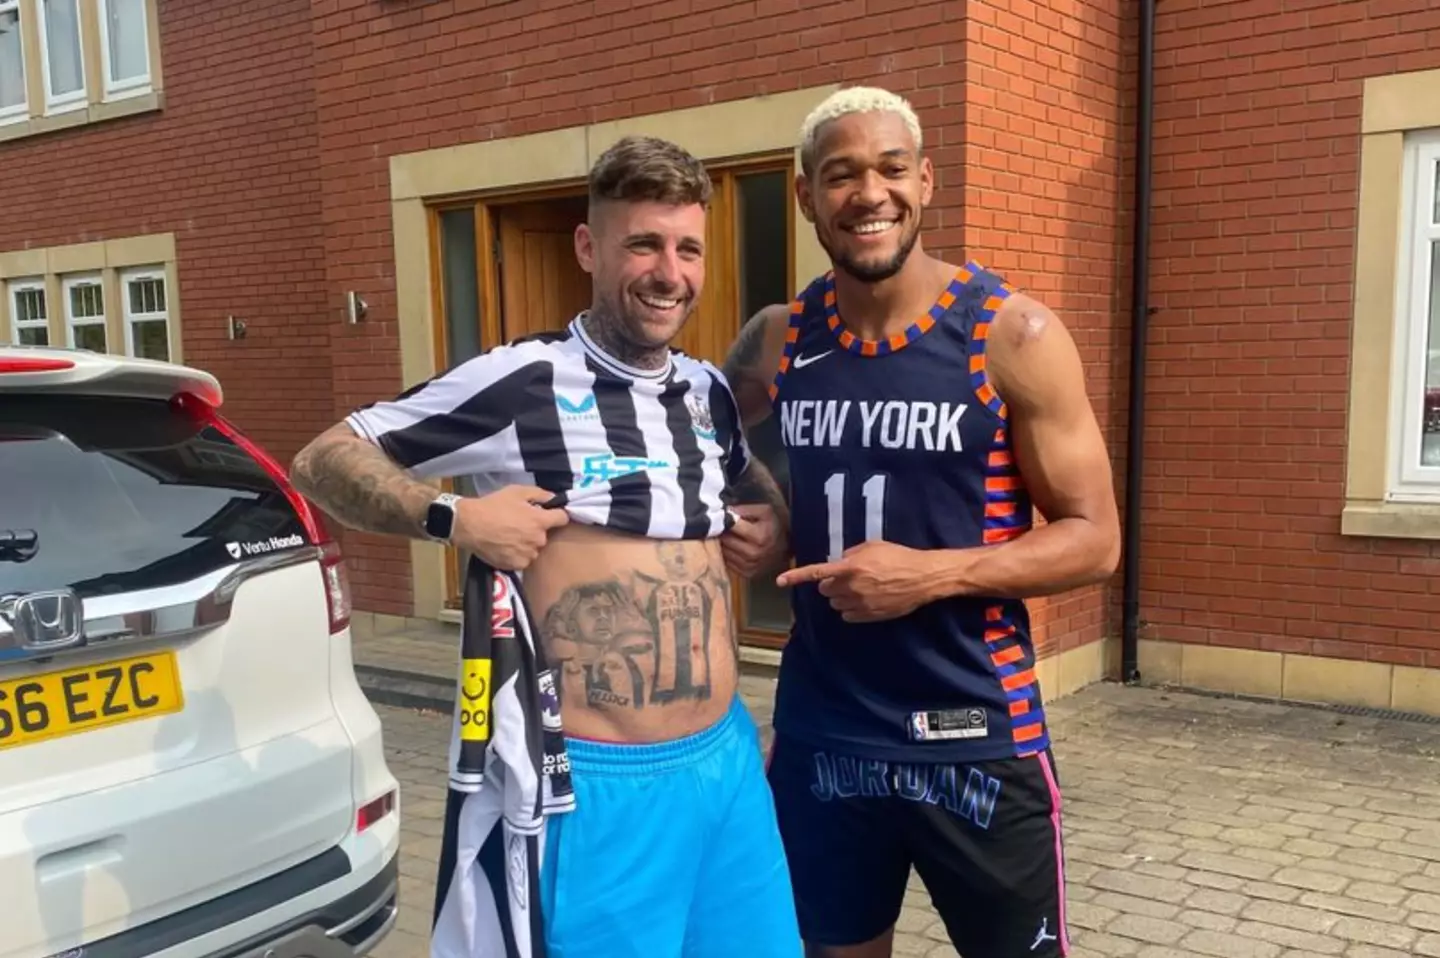 Kevin and Joelinton. (Image